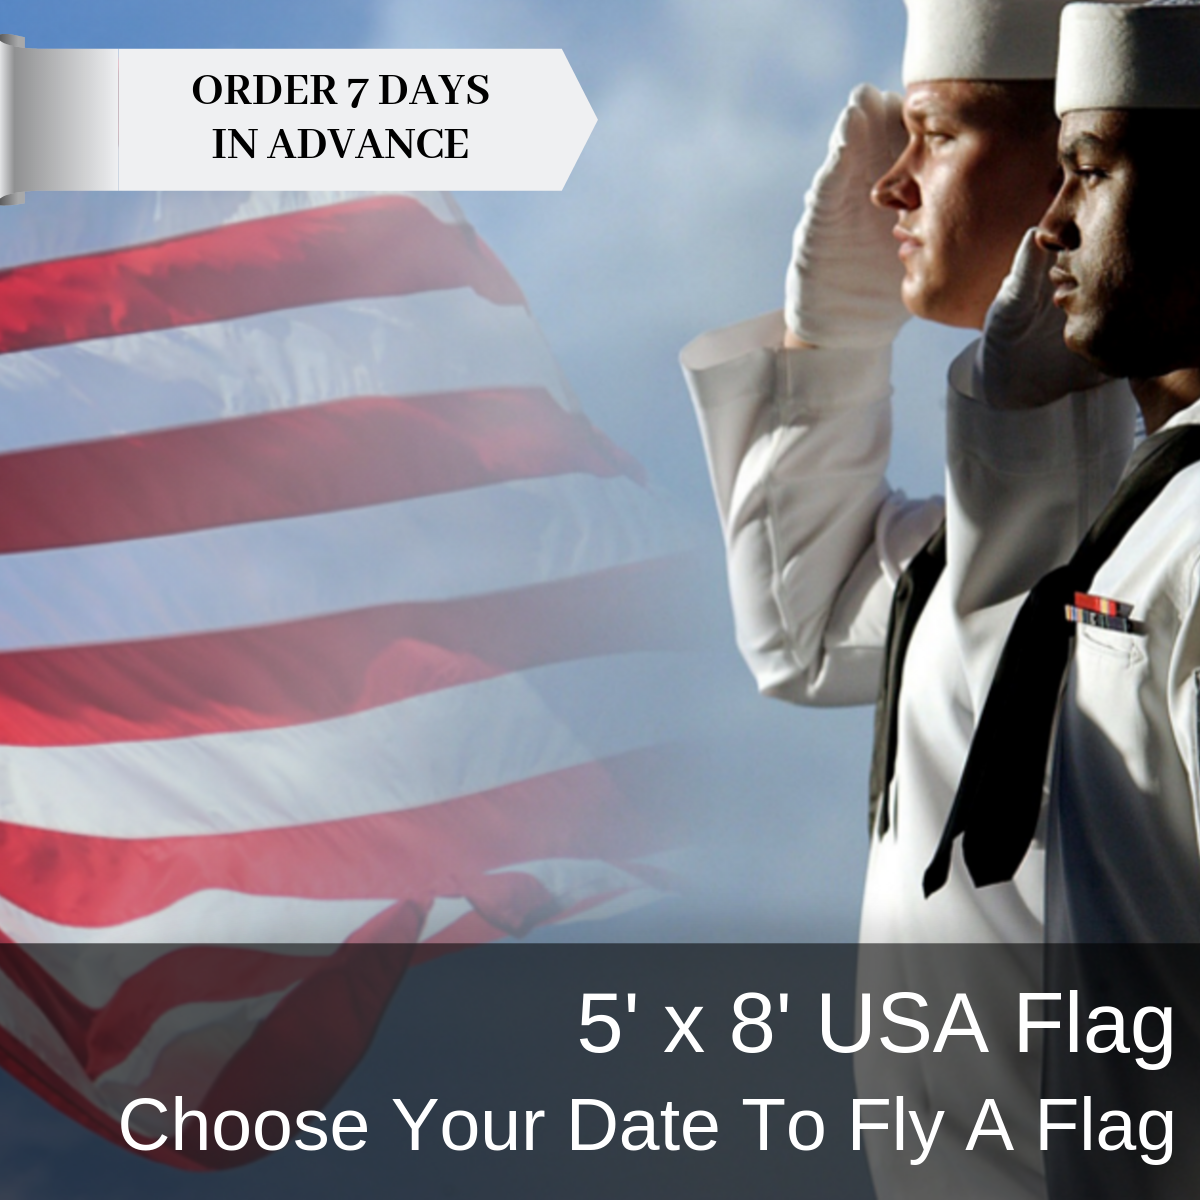 5x8 Choose Your Date USA Flag Flown On USS Arizona Memorial At Pearl Harbor